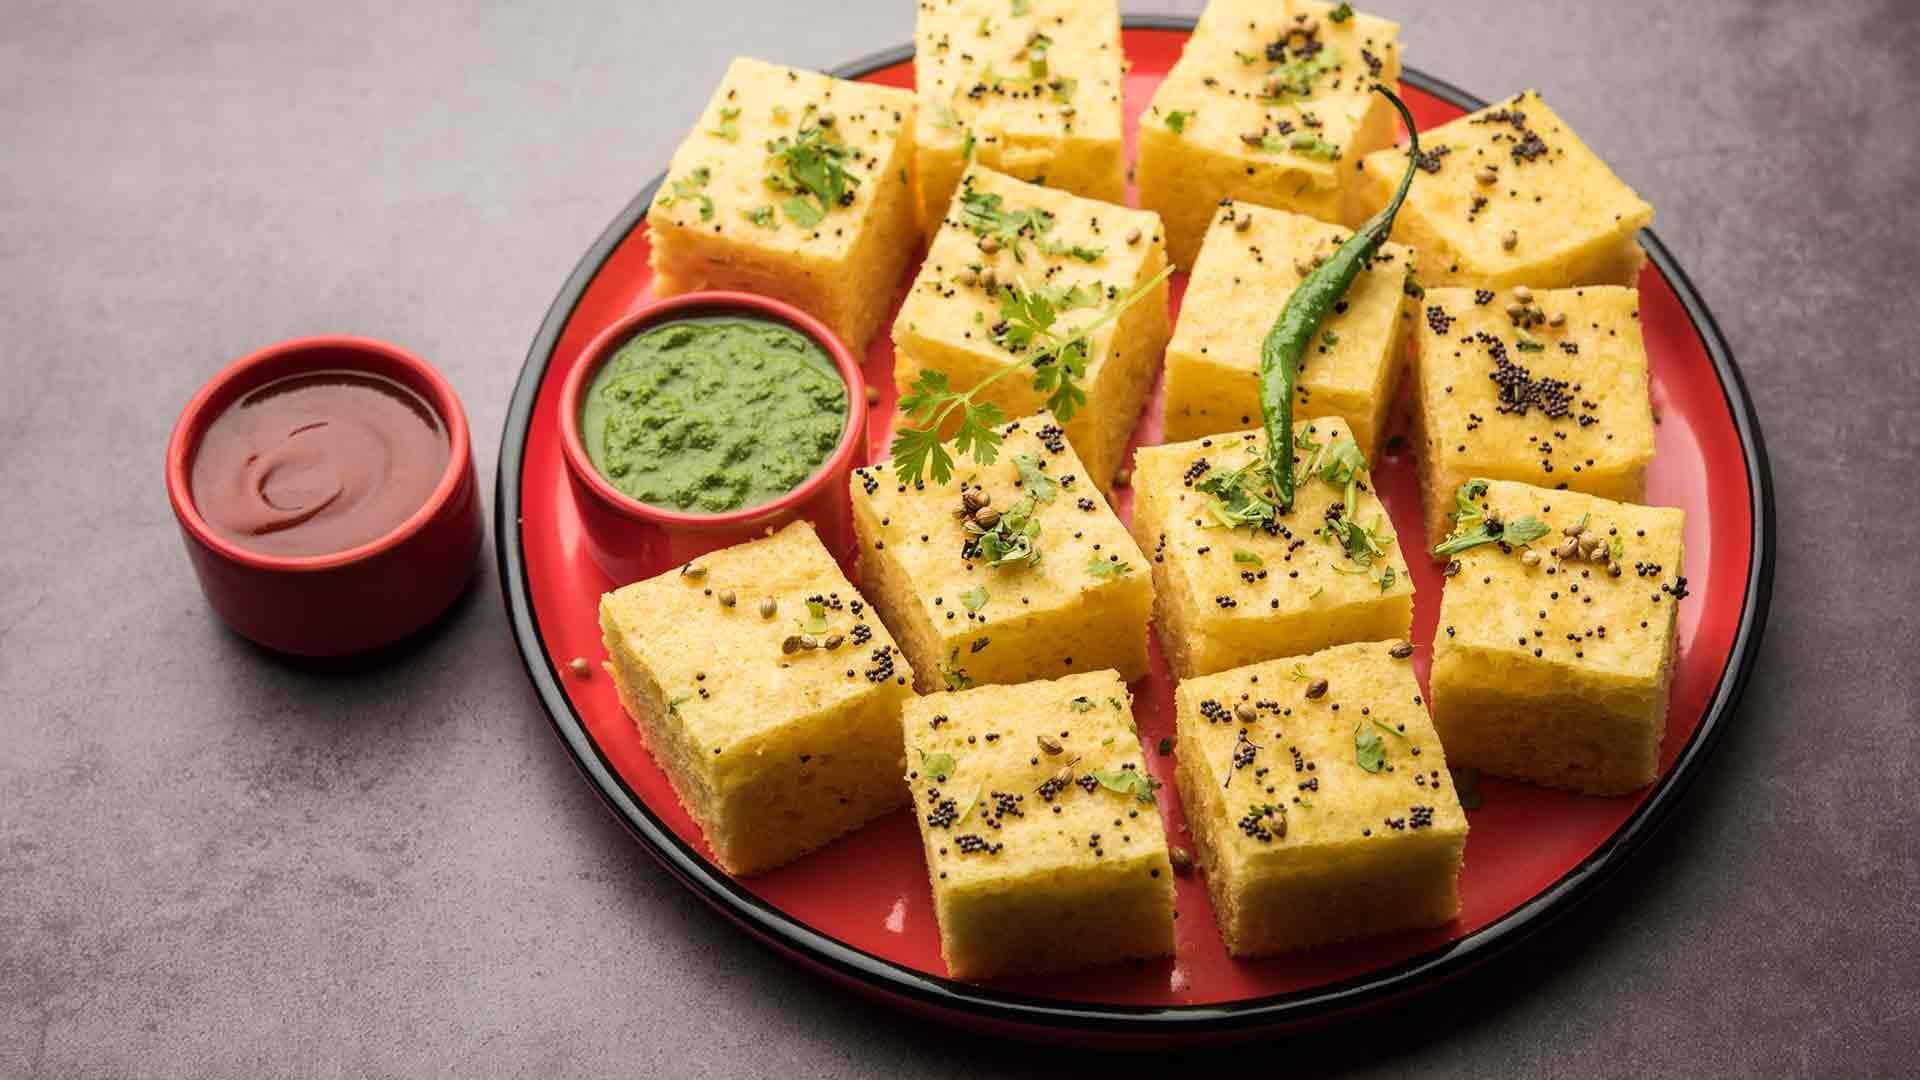 Satiate your dhokla cravings with this easy recipe